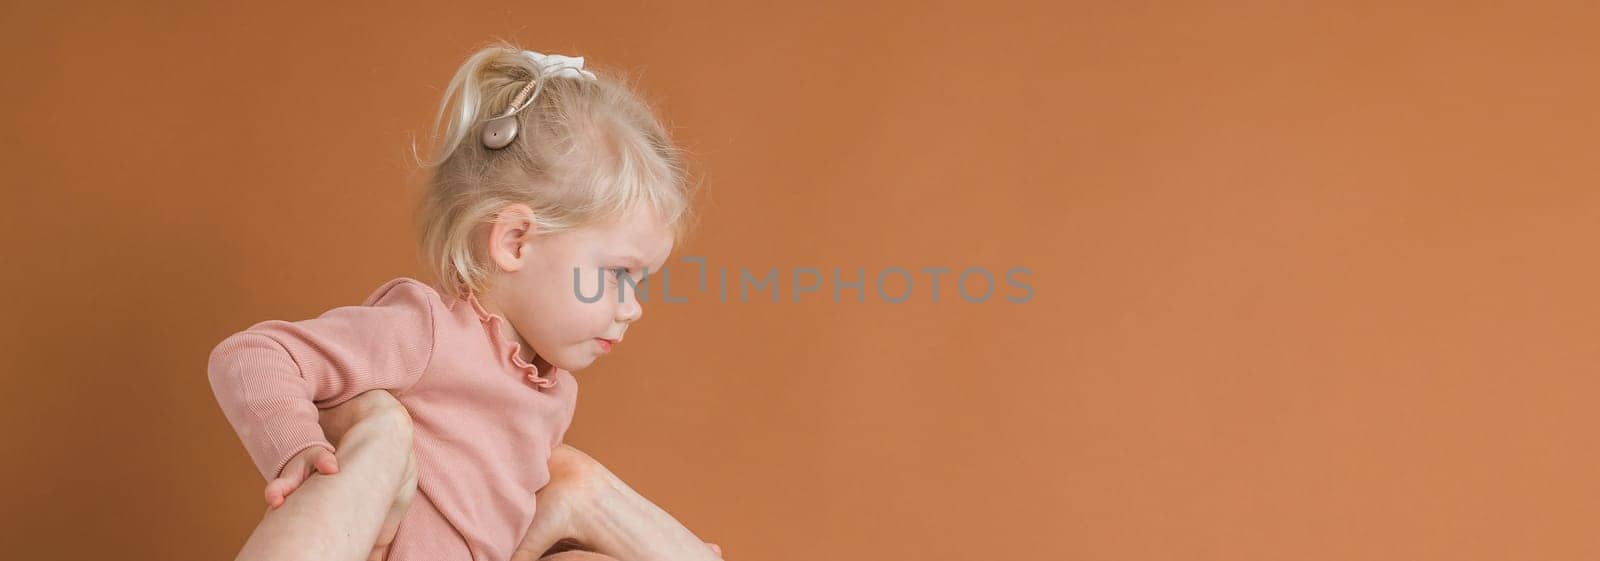 Banner copy space deaf child girl with cochlear implant studying to hear sounds and have fun - recovery after cochlear Implant surgery and rehabilitation concept by Satura86